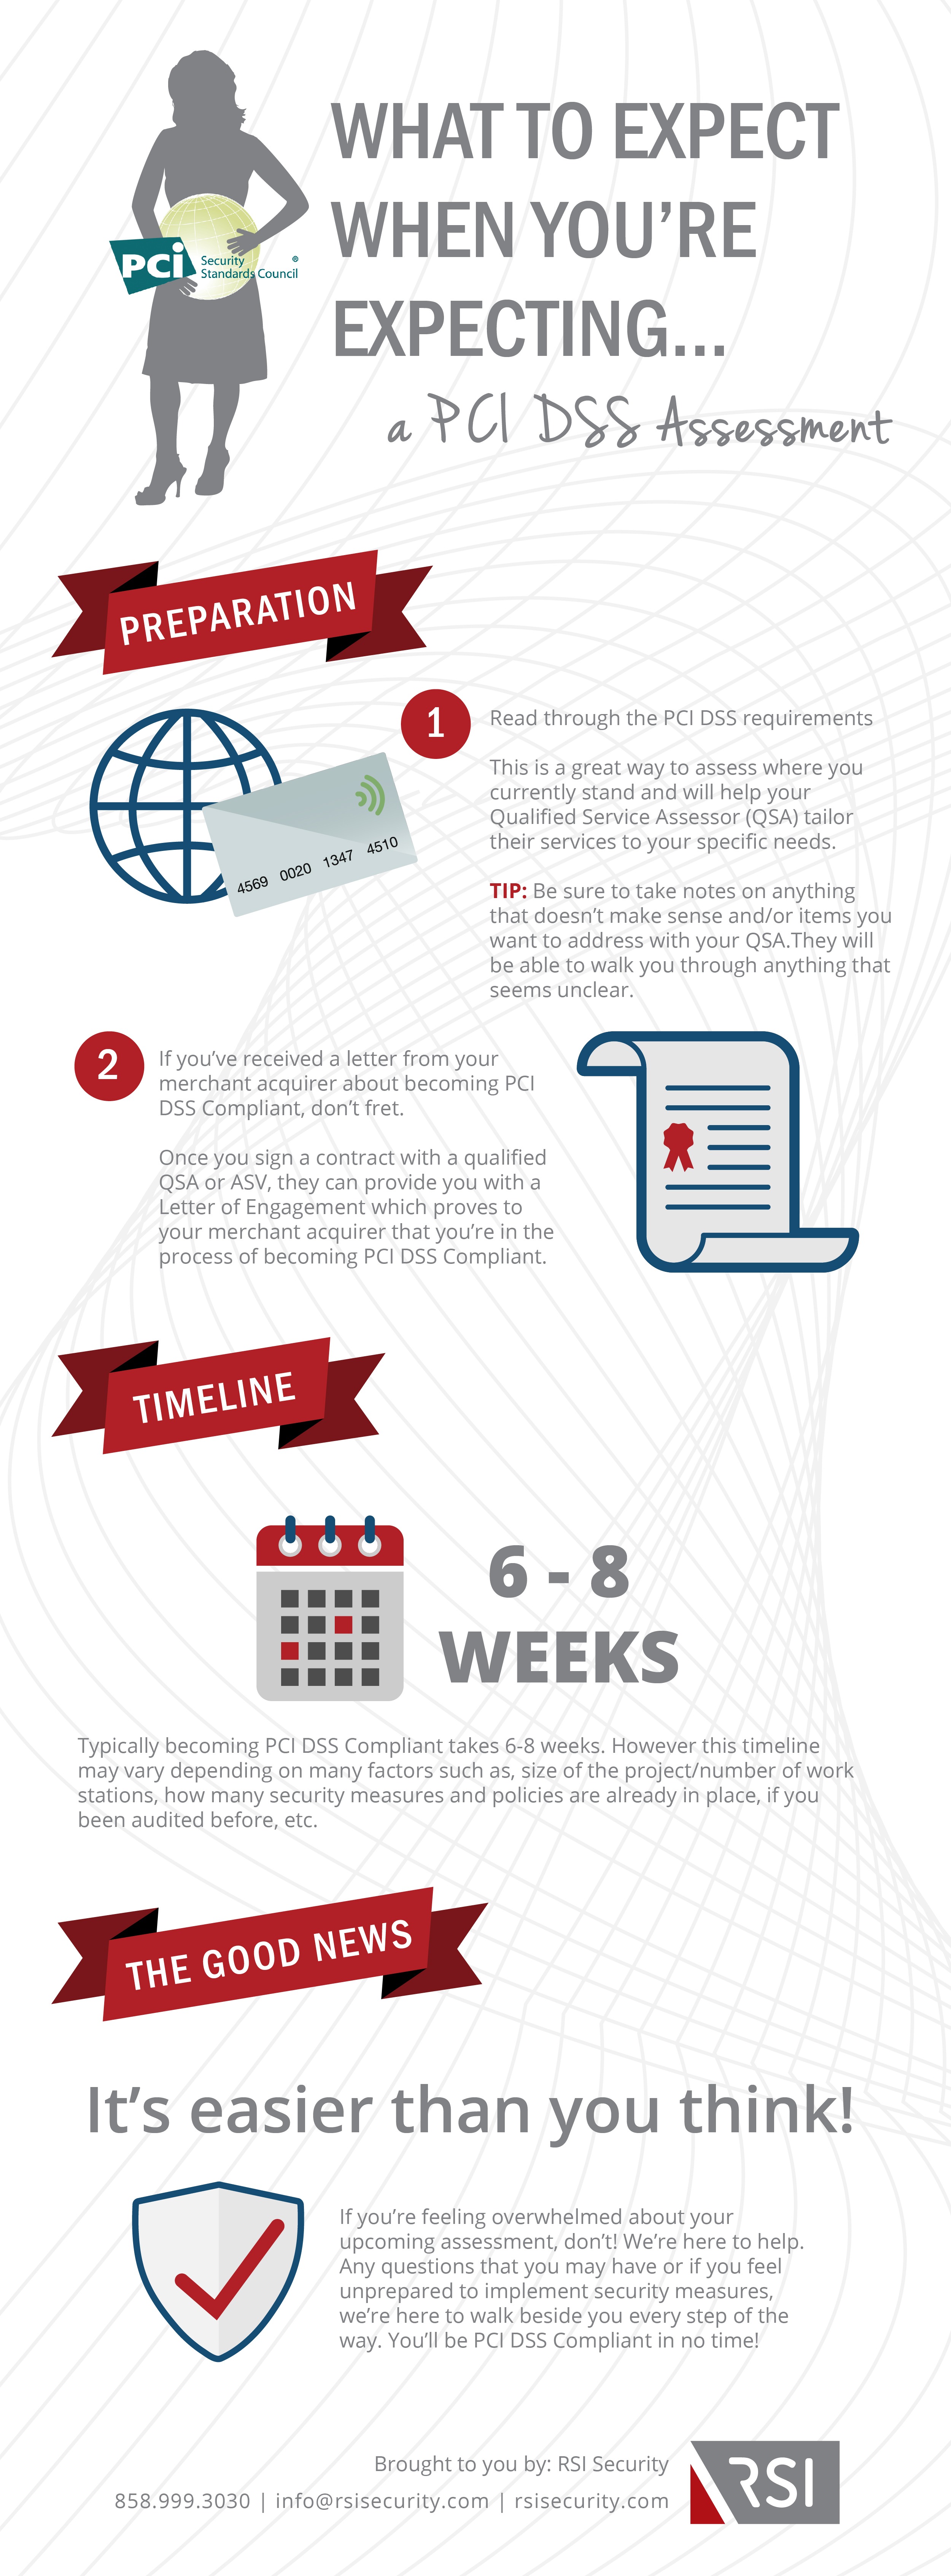 what to expect when you're expecting a pci dss assessment [infographic]